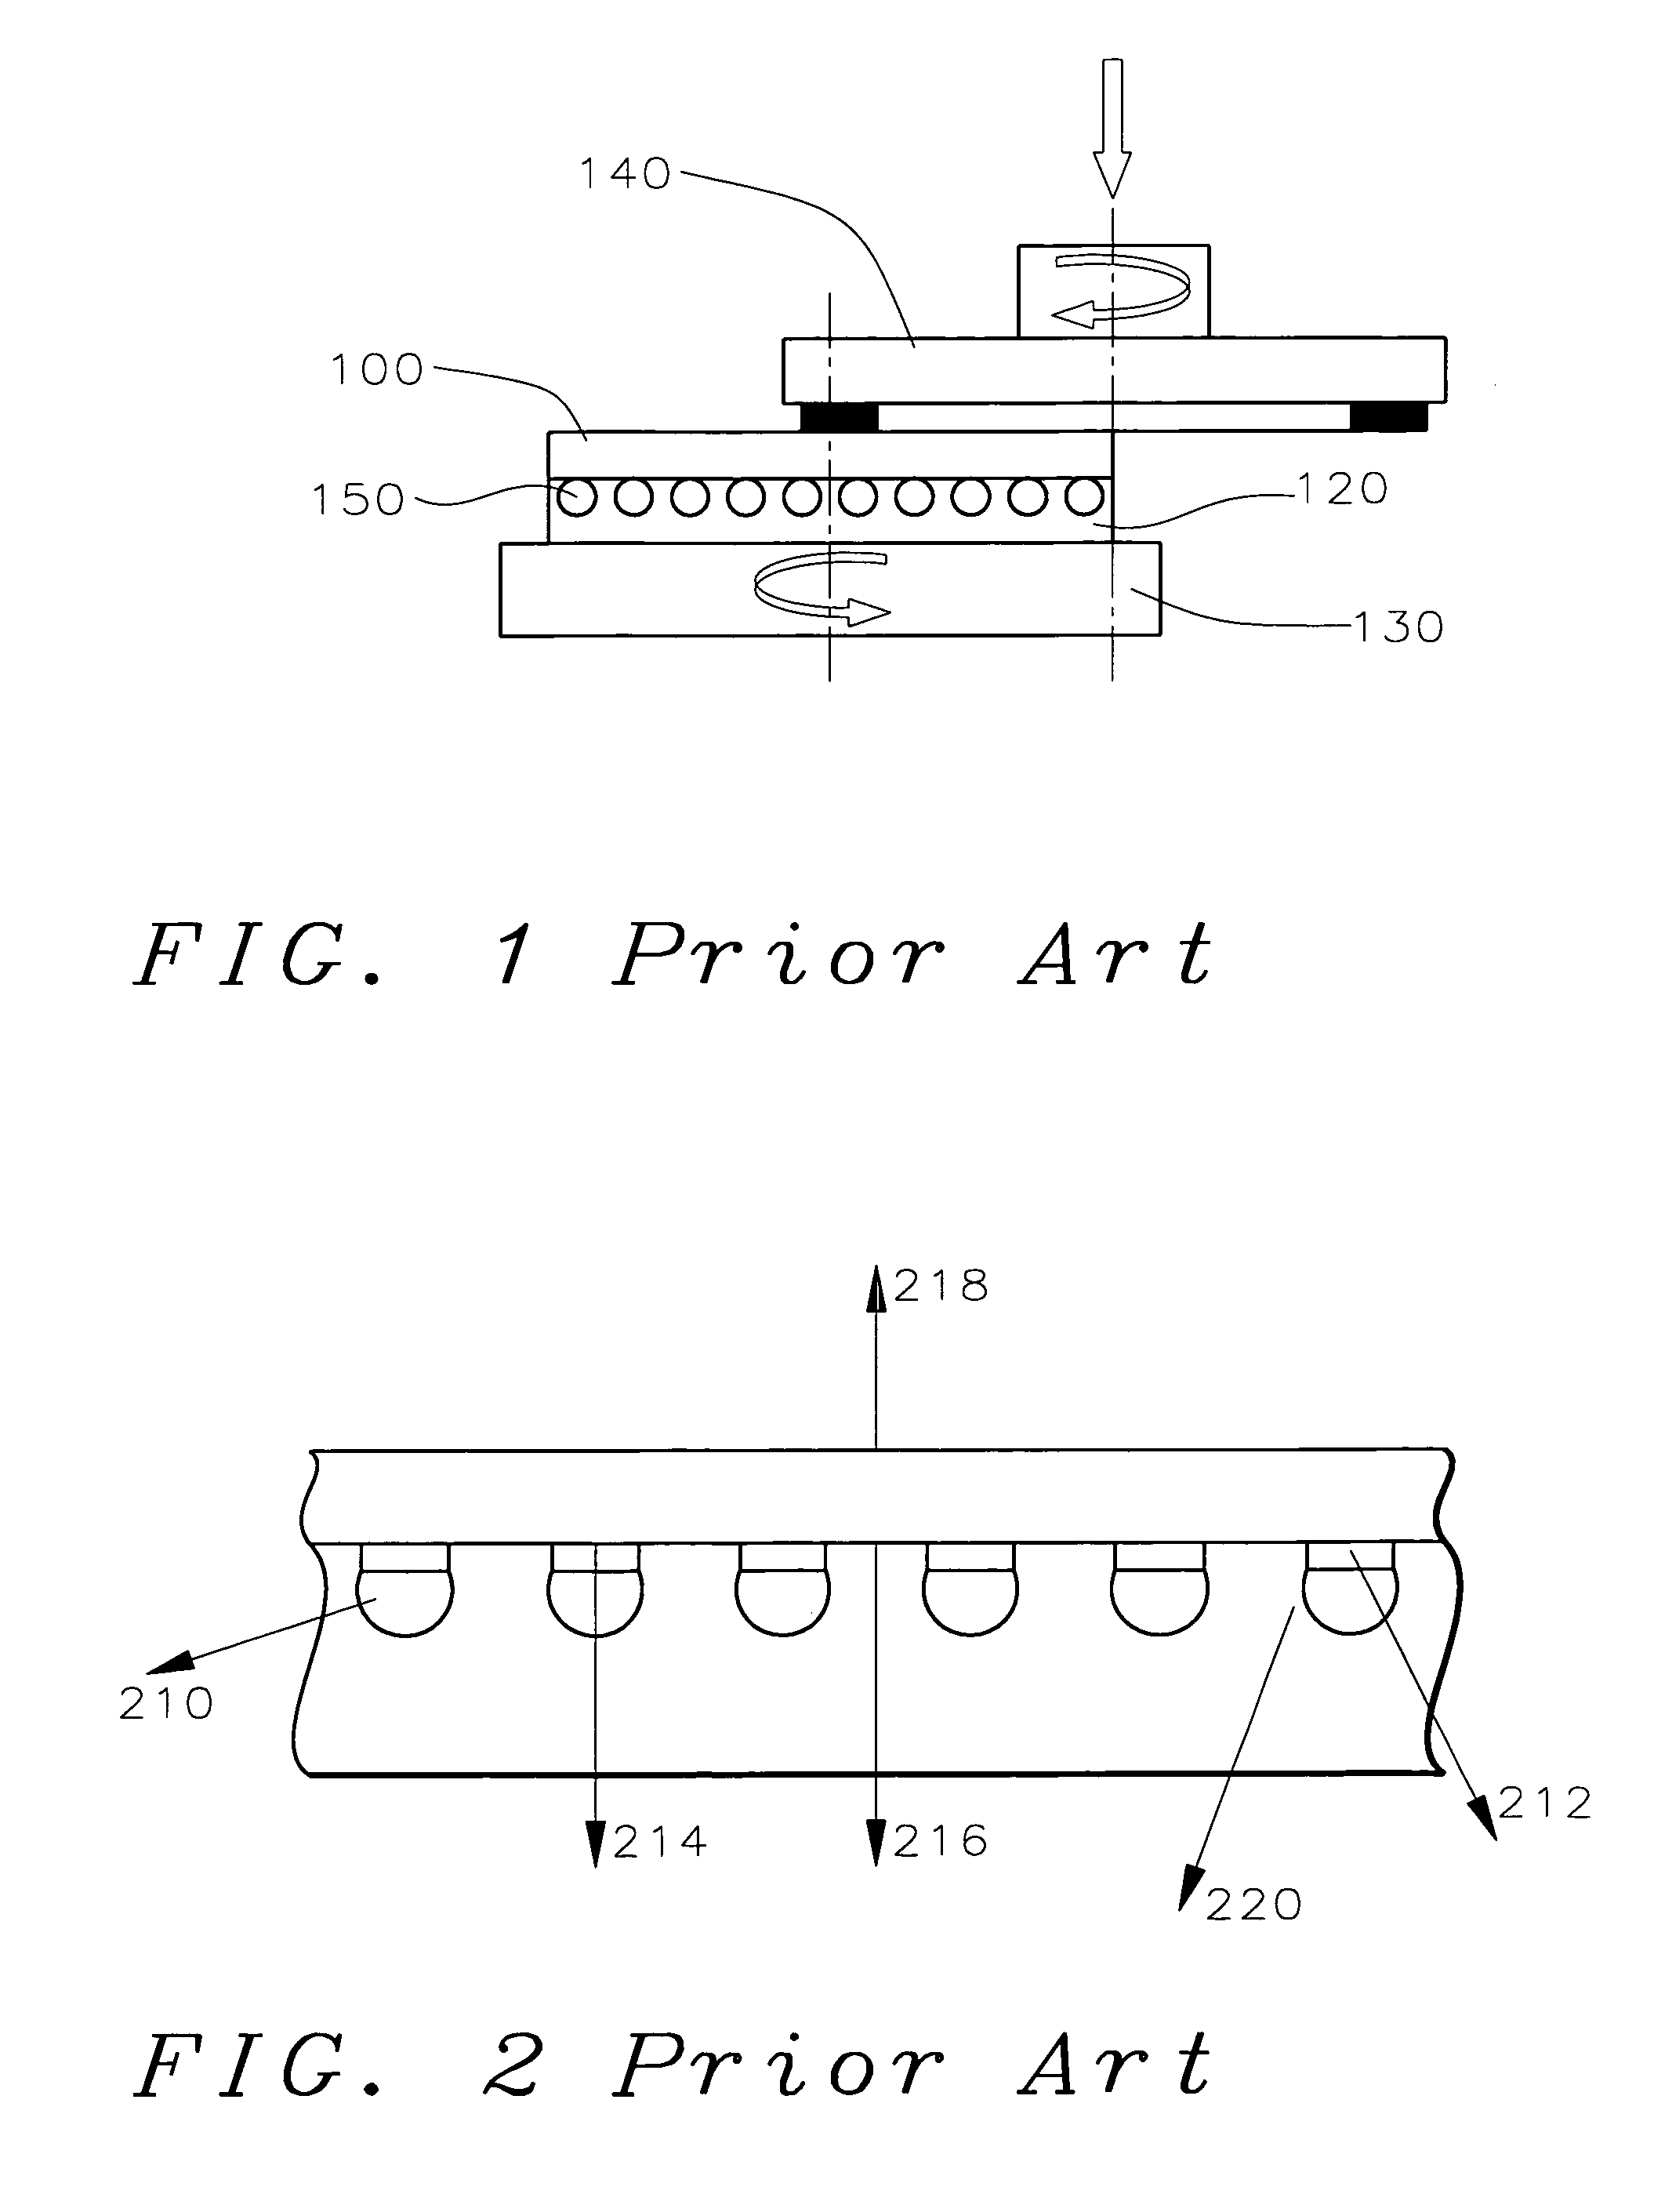 Method for ultra thinning bumped wafers for flip chip